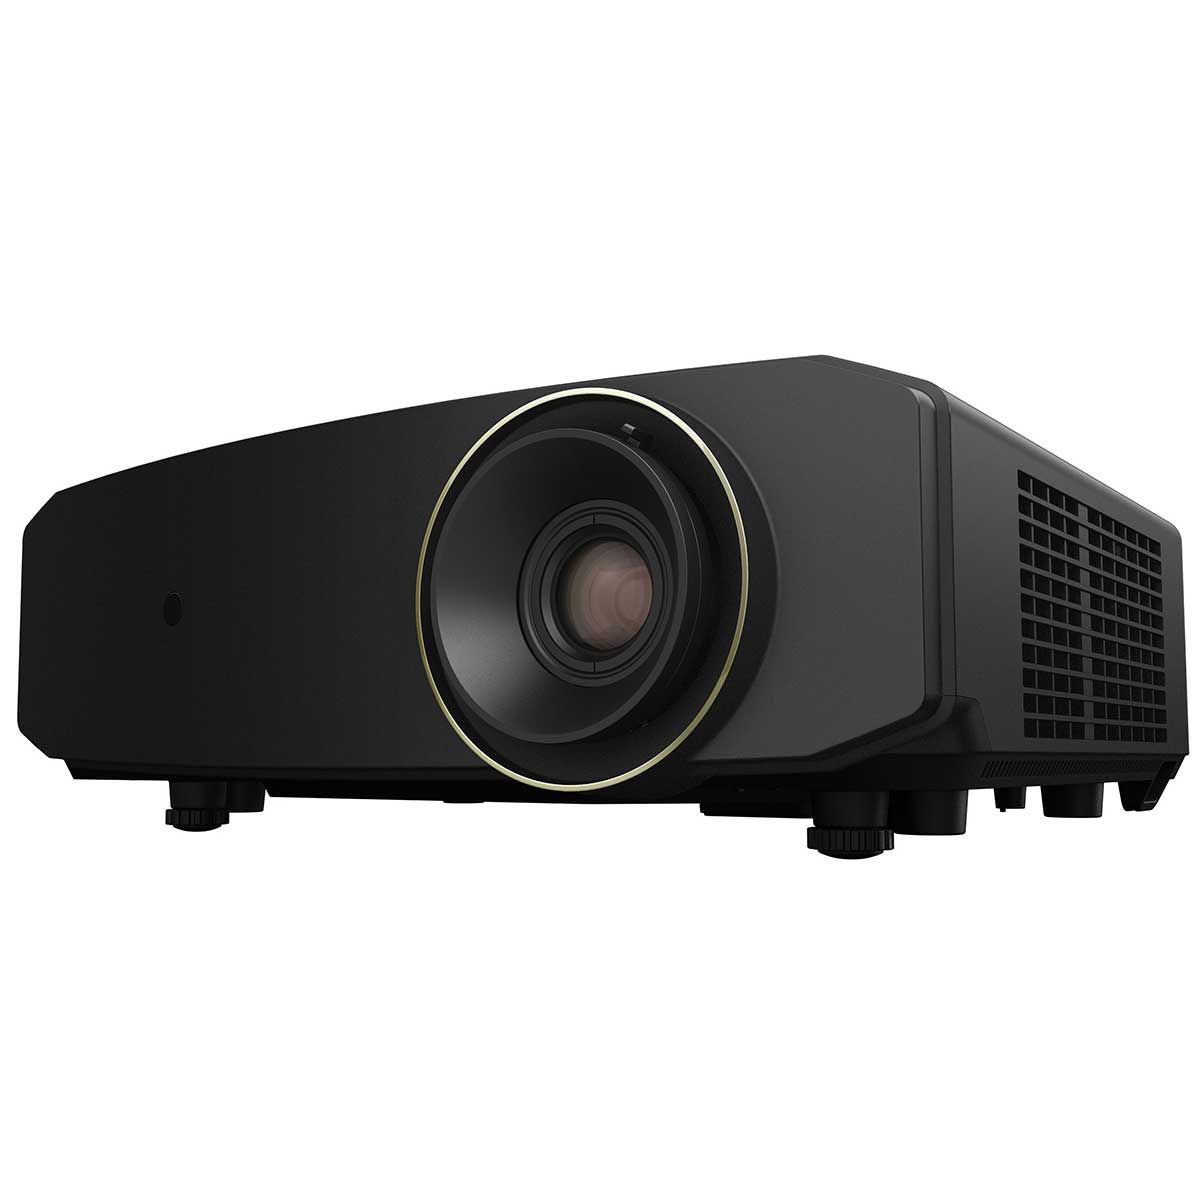 angled view of JVC LX-NZ3 home theater projector in black color